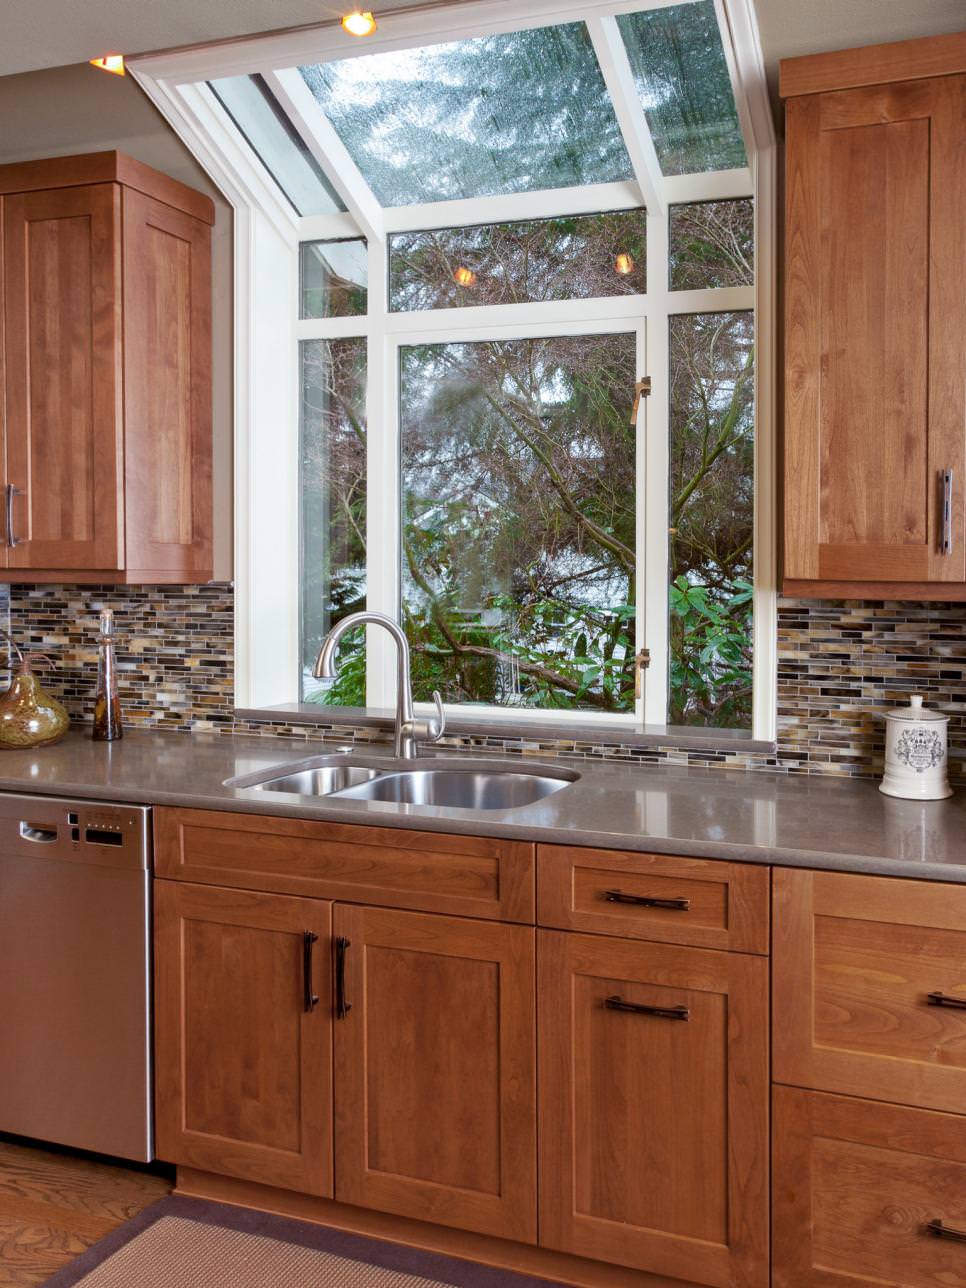 sink kitchen window over hgtv lovely windows above designs wall candace nordquist trends